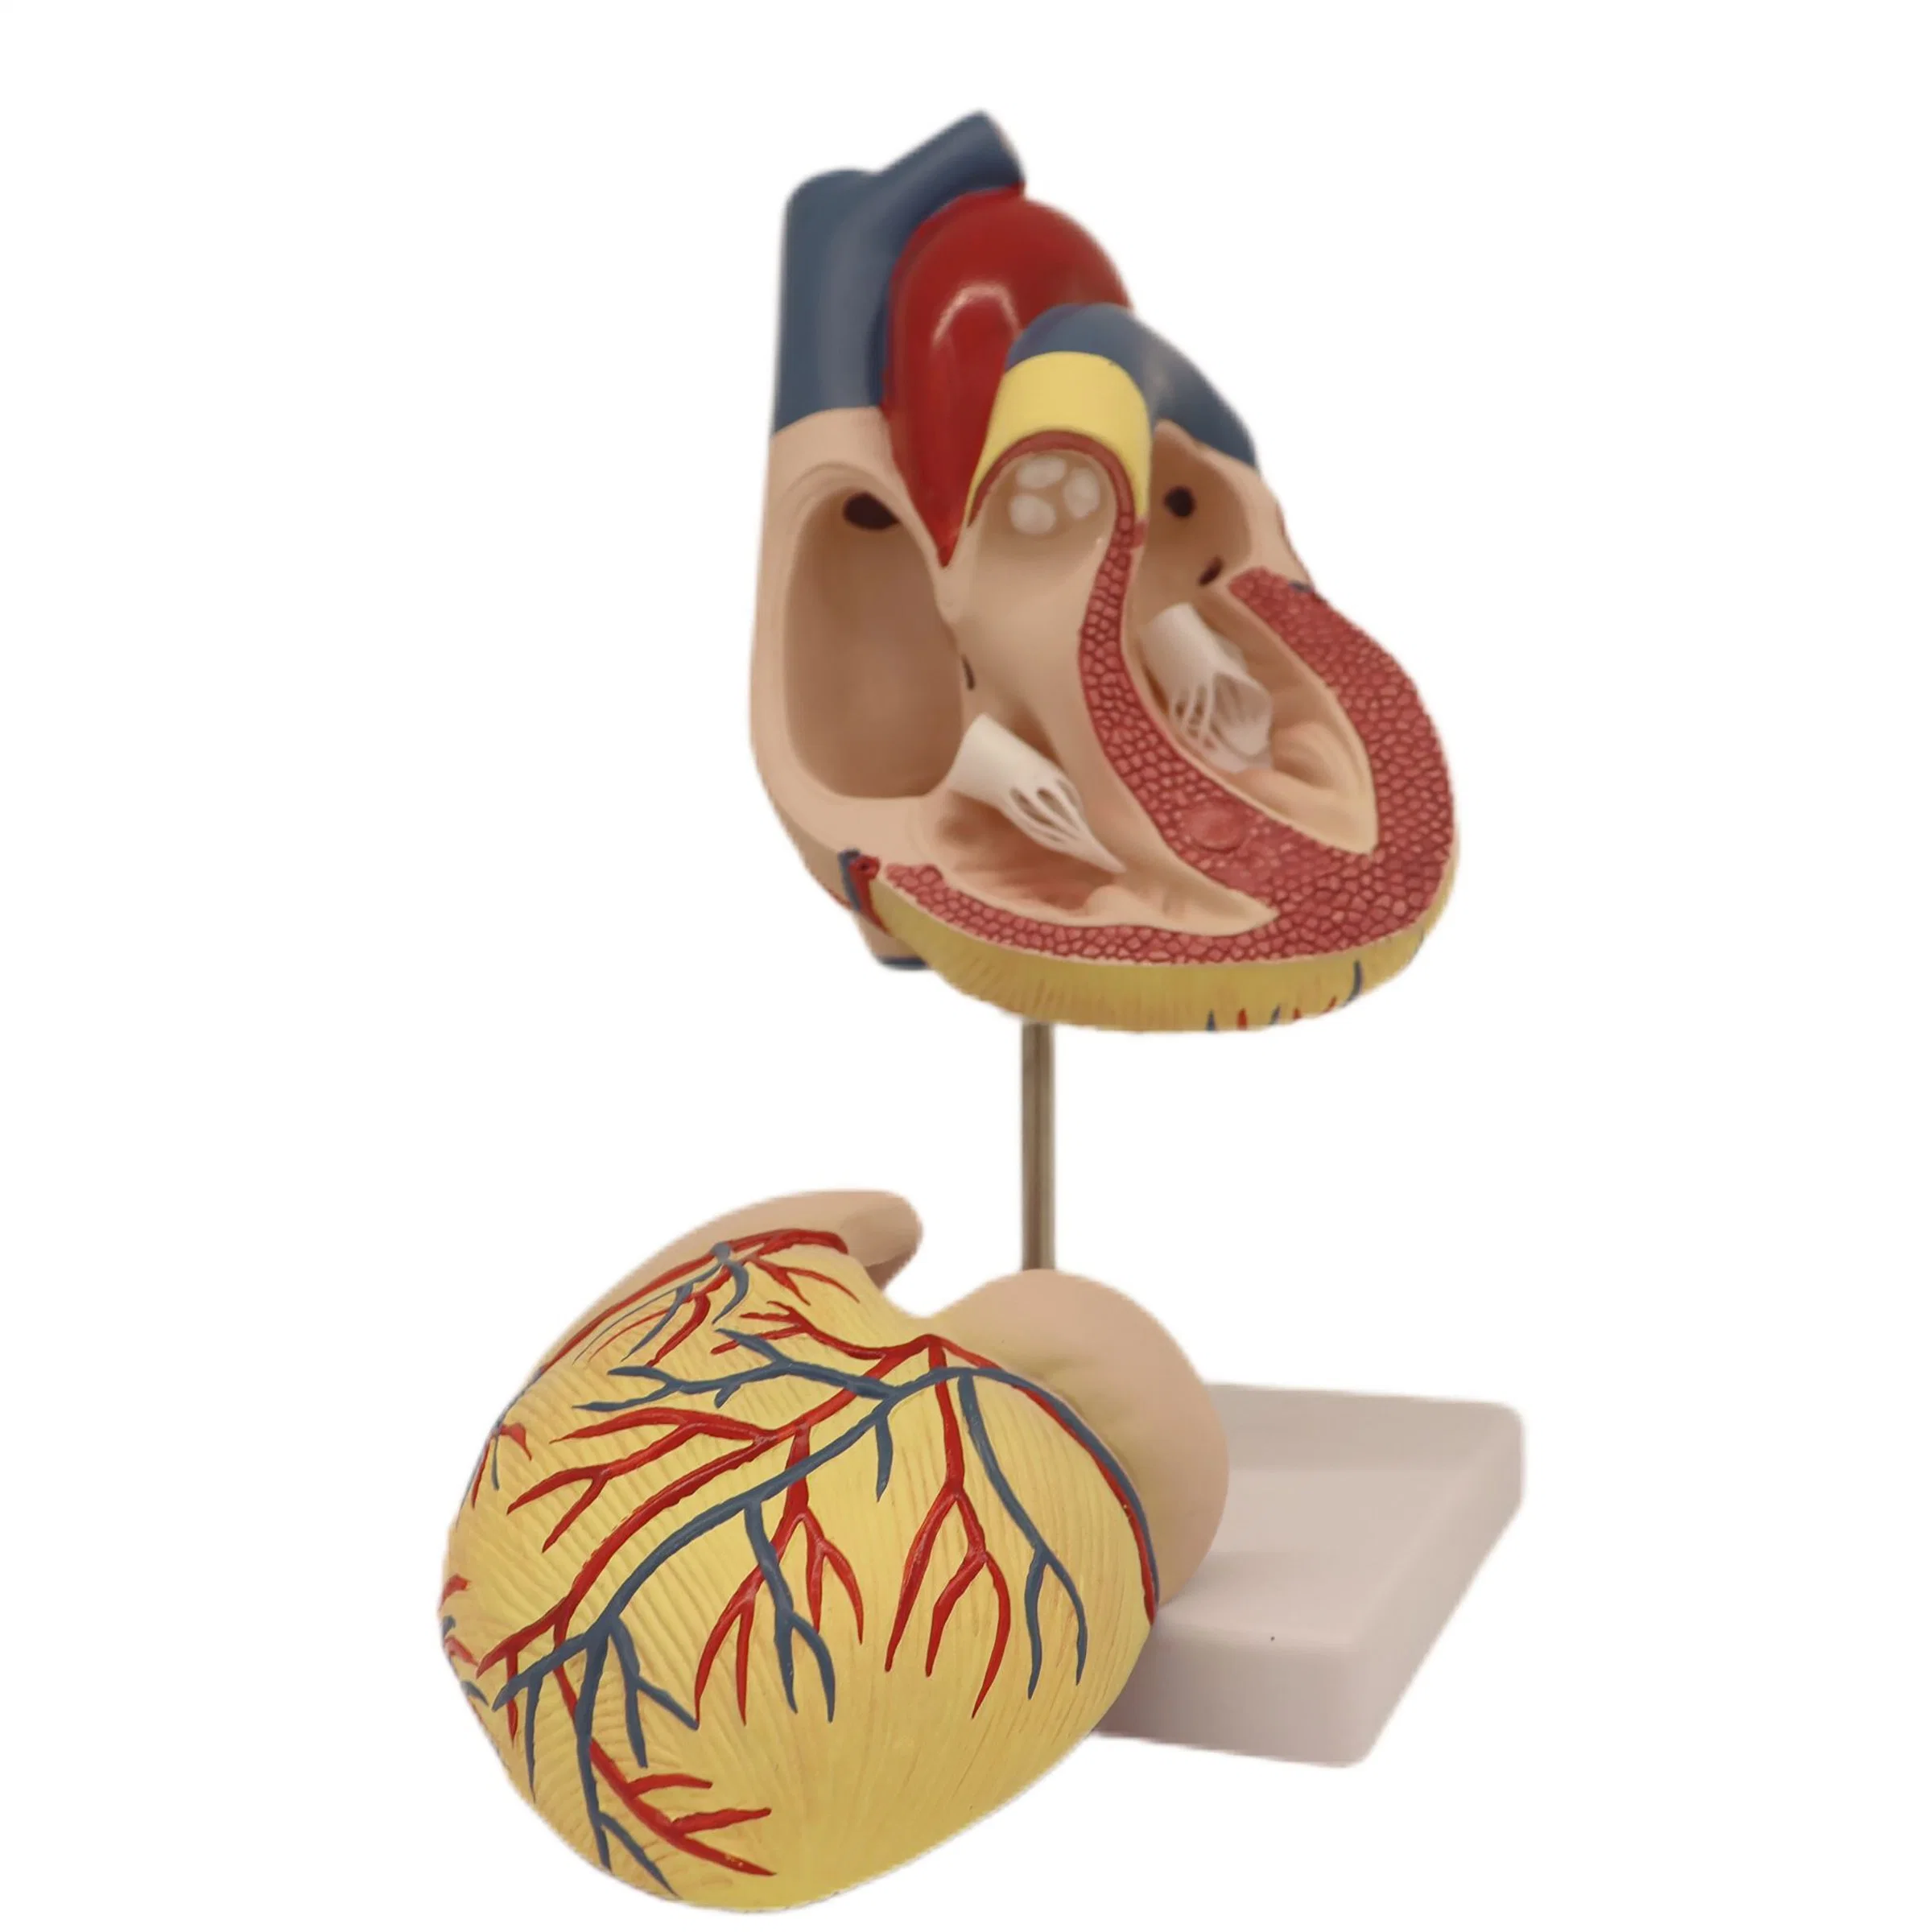 Good Quality Classic Discount Price PVC Humam Anatomical Model Model of Heart Dissection